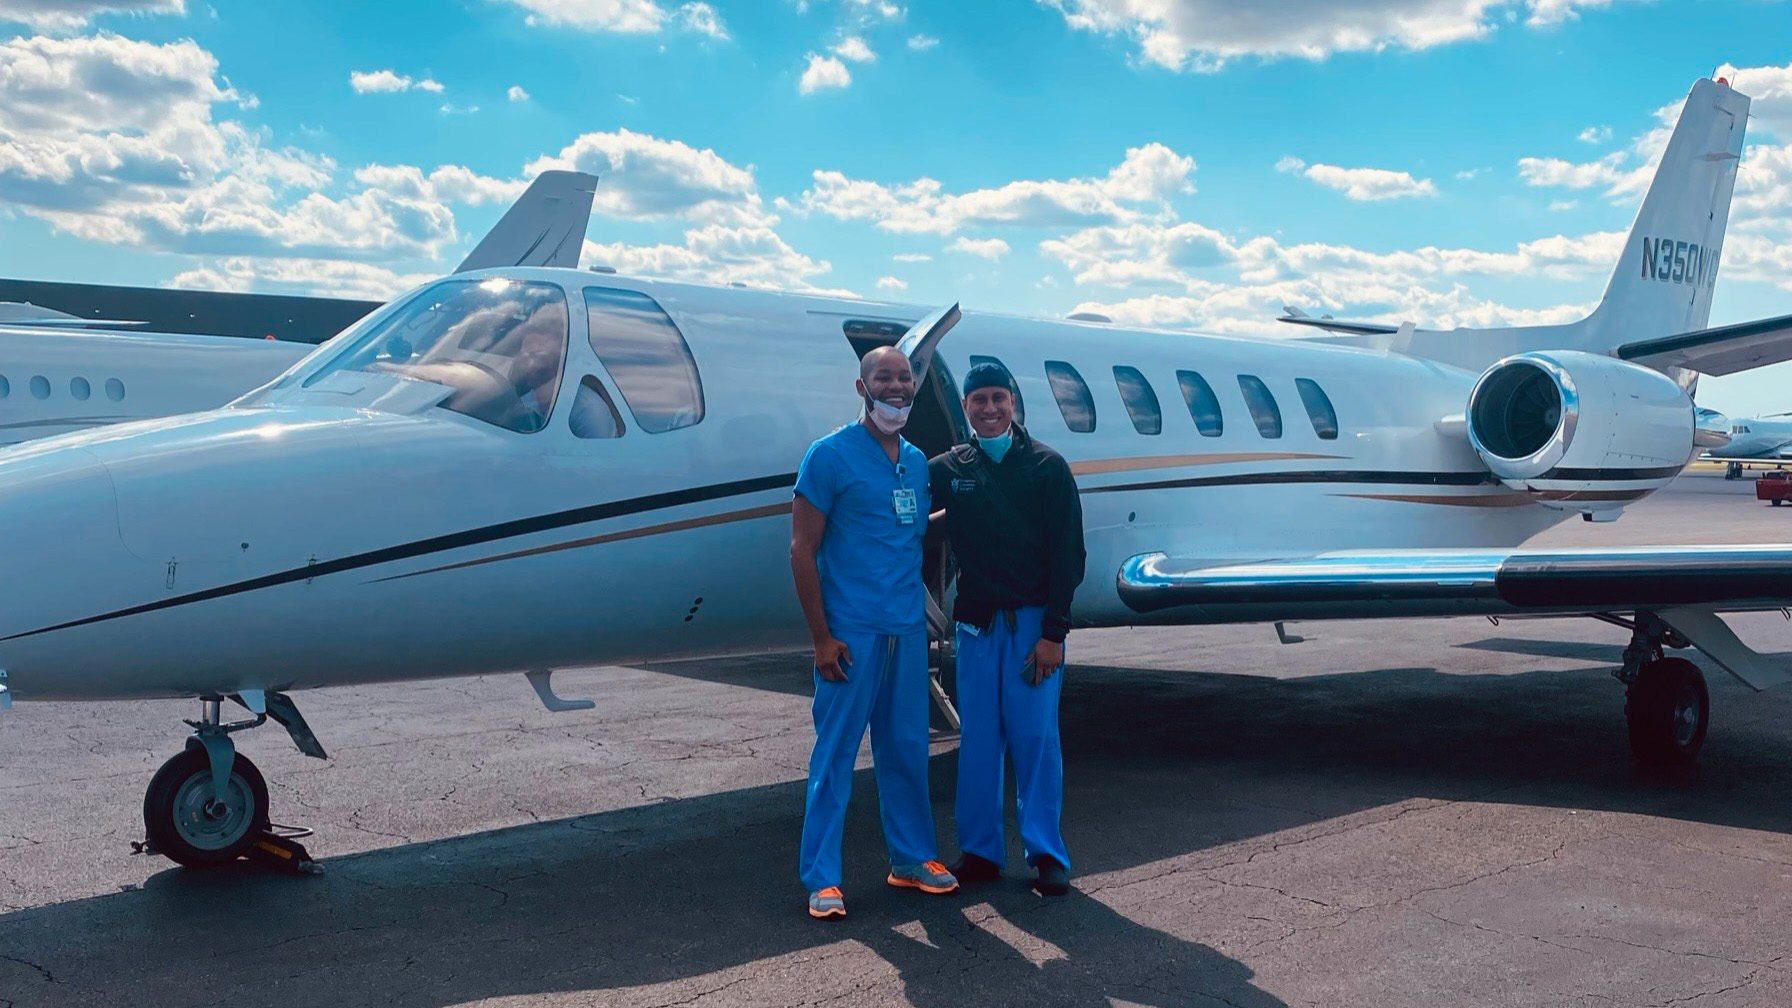 Malcom Meredith and Dr. Aguirre stand outside a small jet at an airport